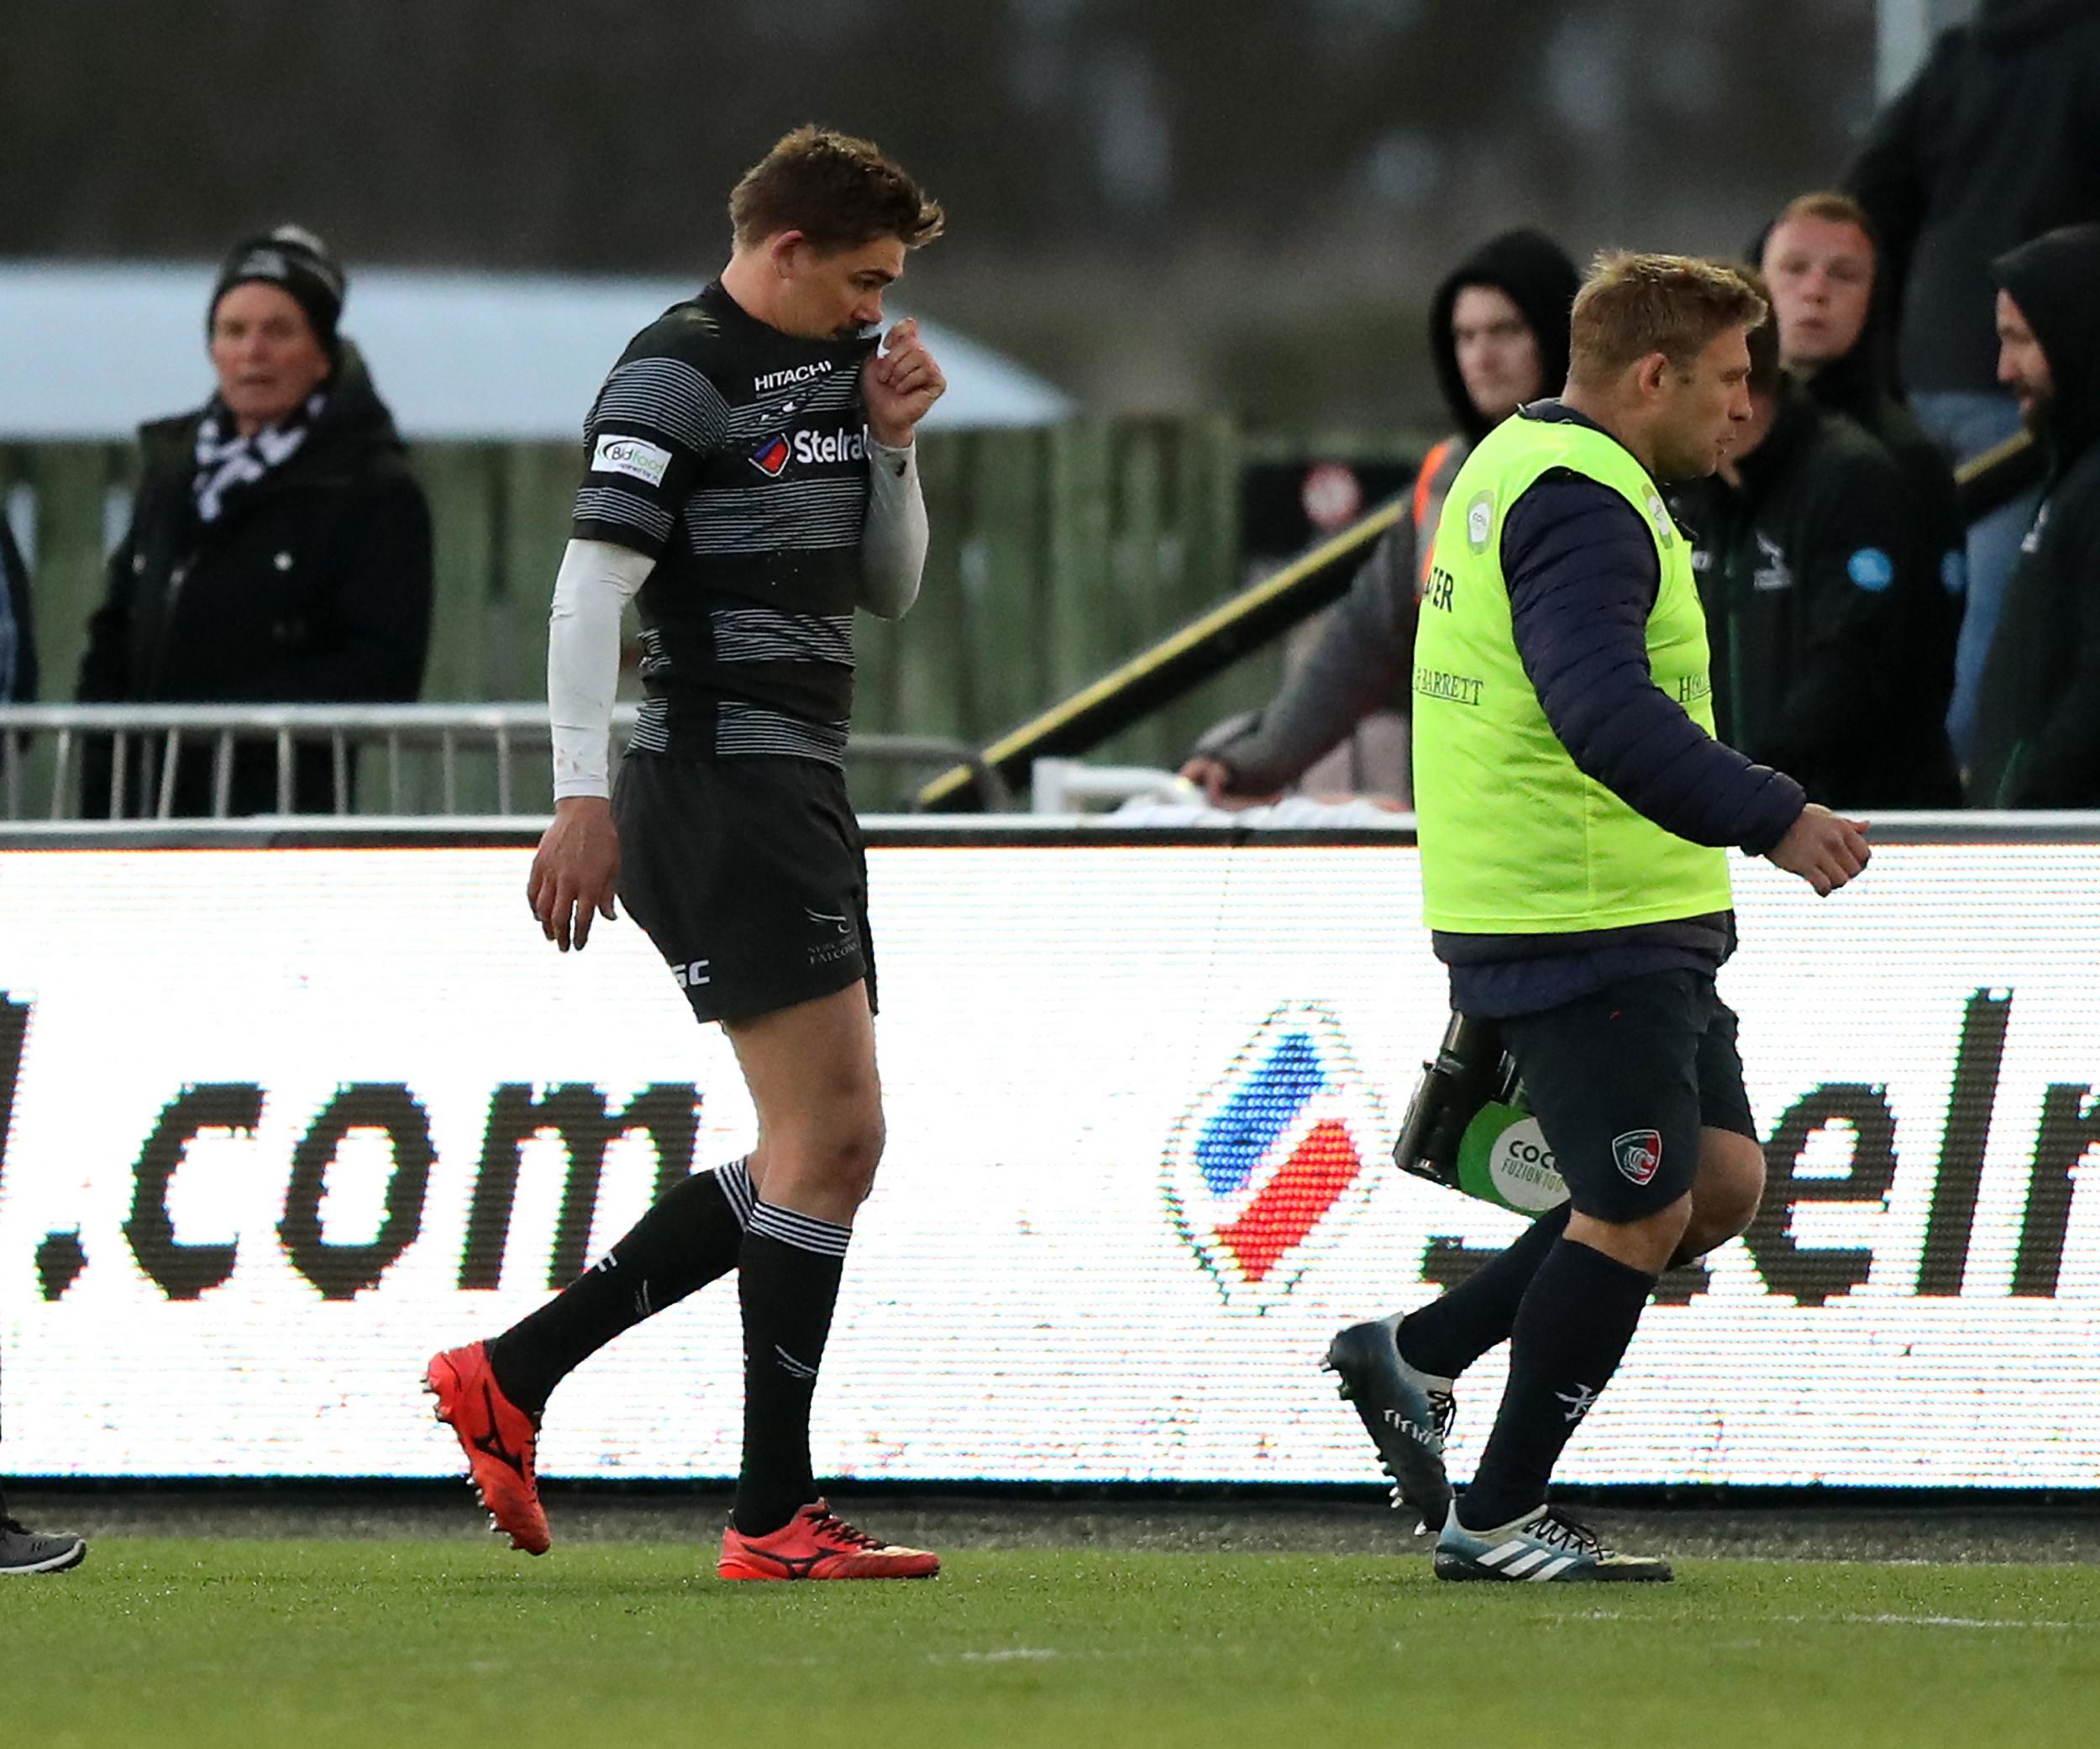 Toby Flood was hit by a dangerous triple-clear out that went unpunished